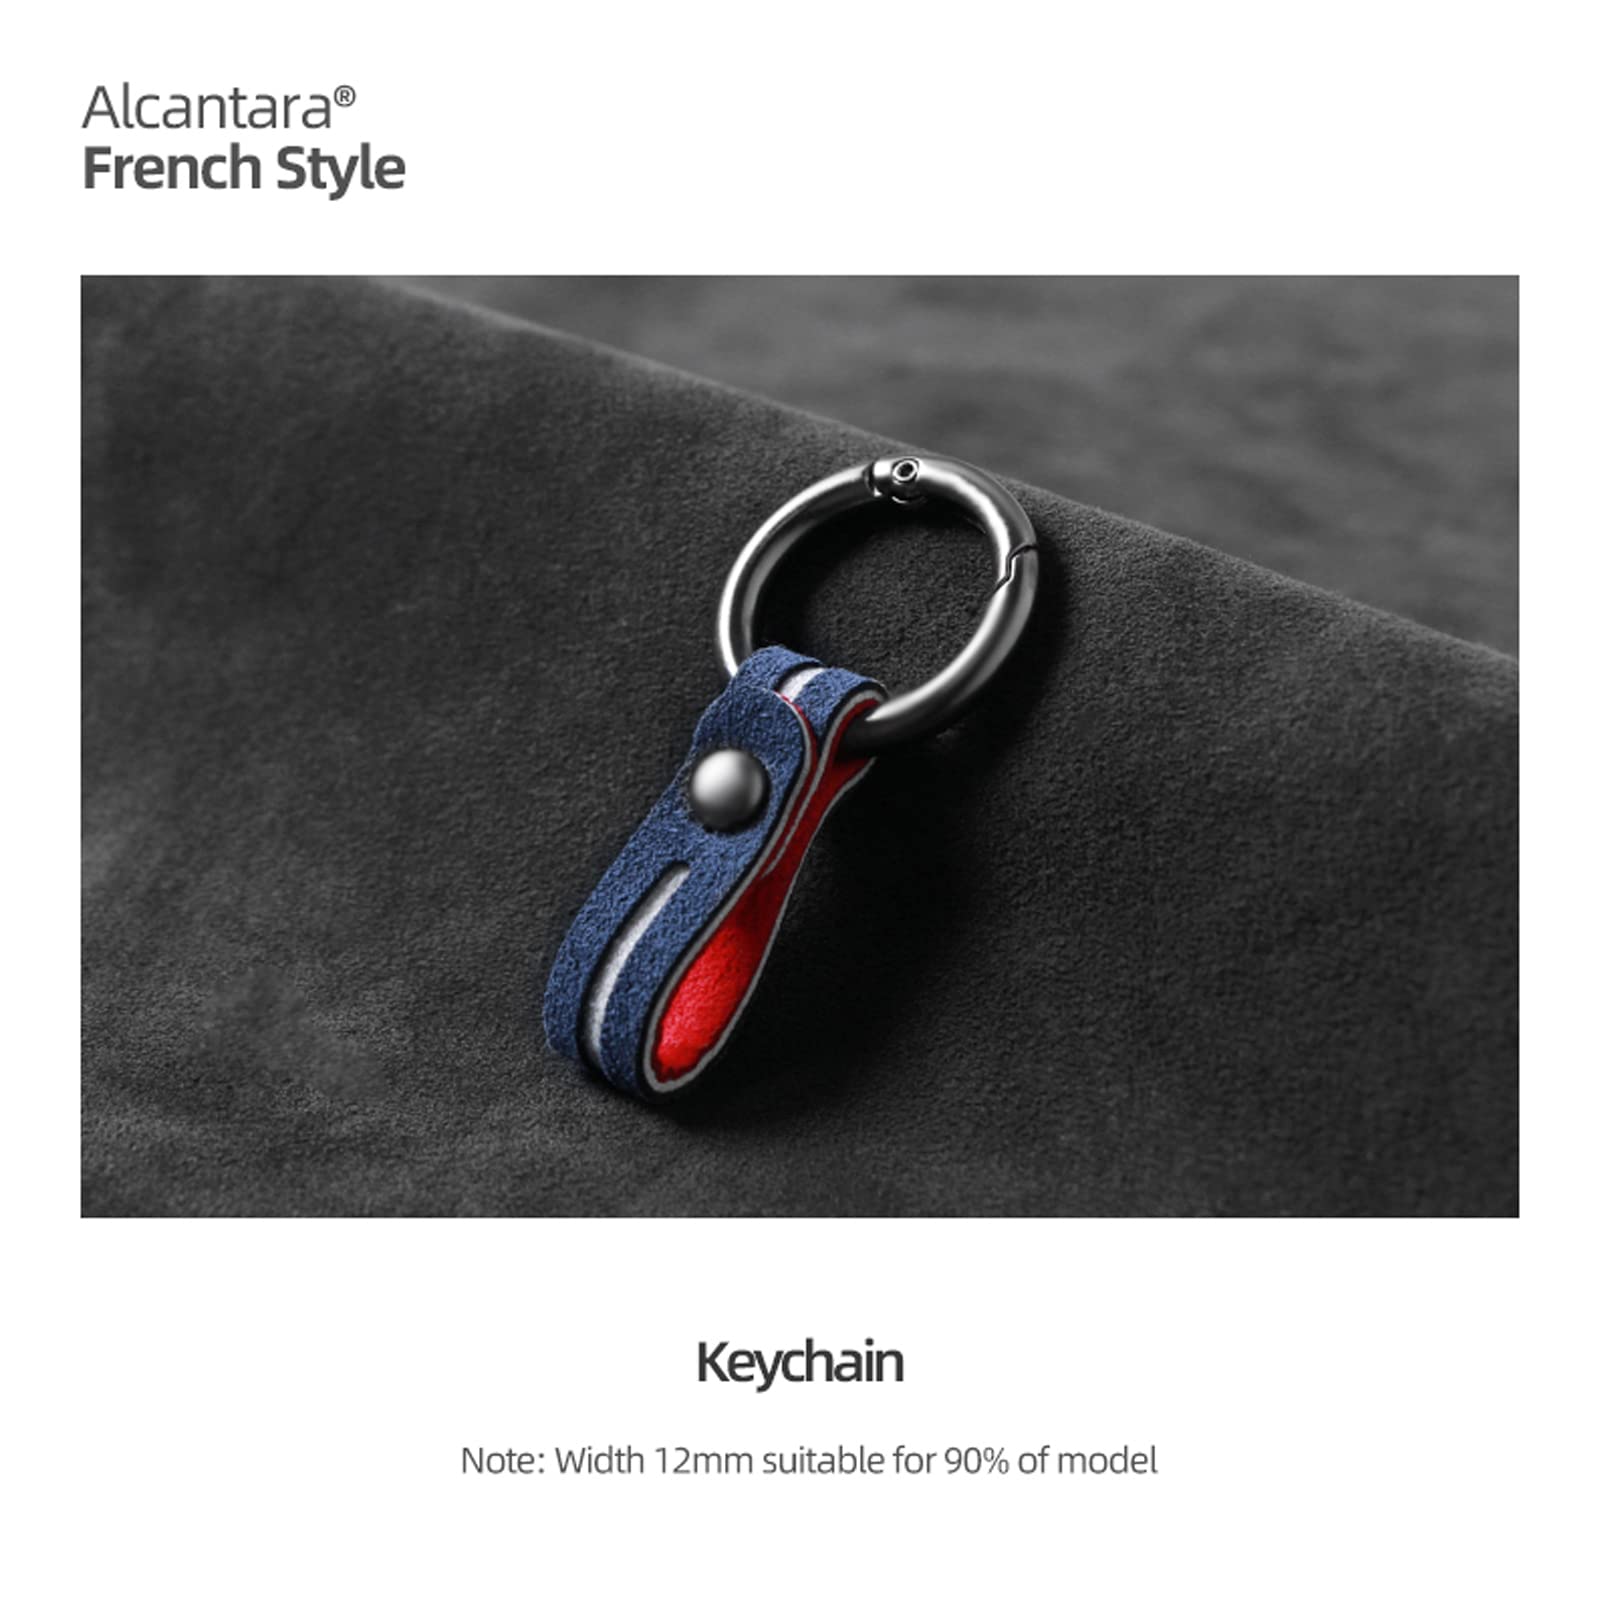 BETTERHUMZ M-Color Alcantara Leather Keychain Ring,Universal Key Chains for Key Fobs for Men and Women Car Accessories (French Style)